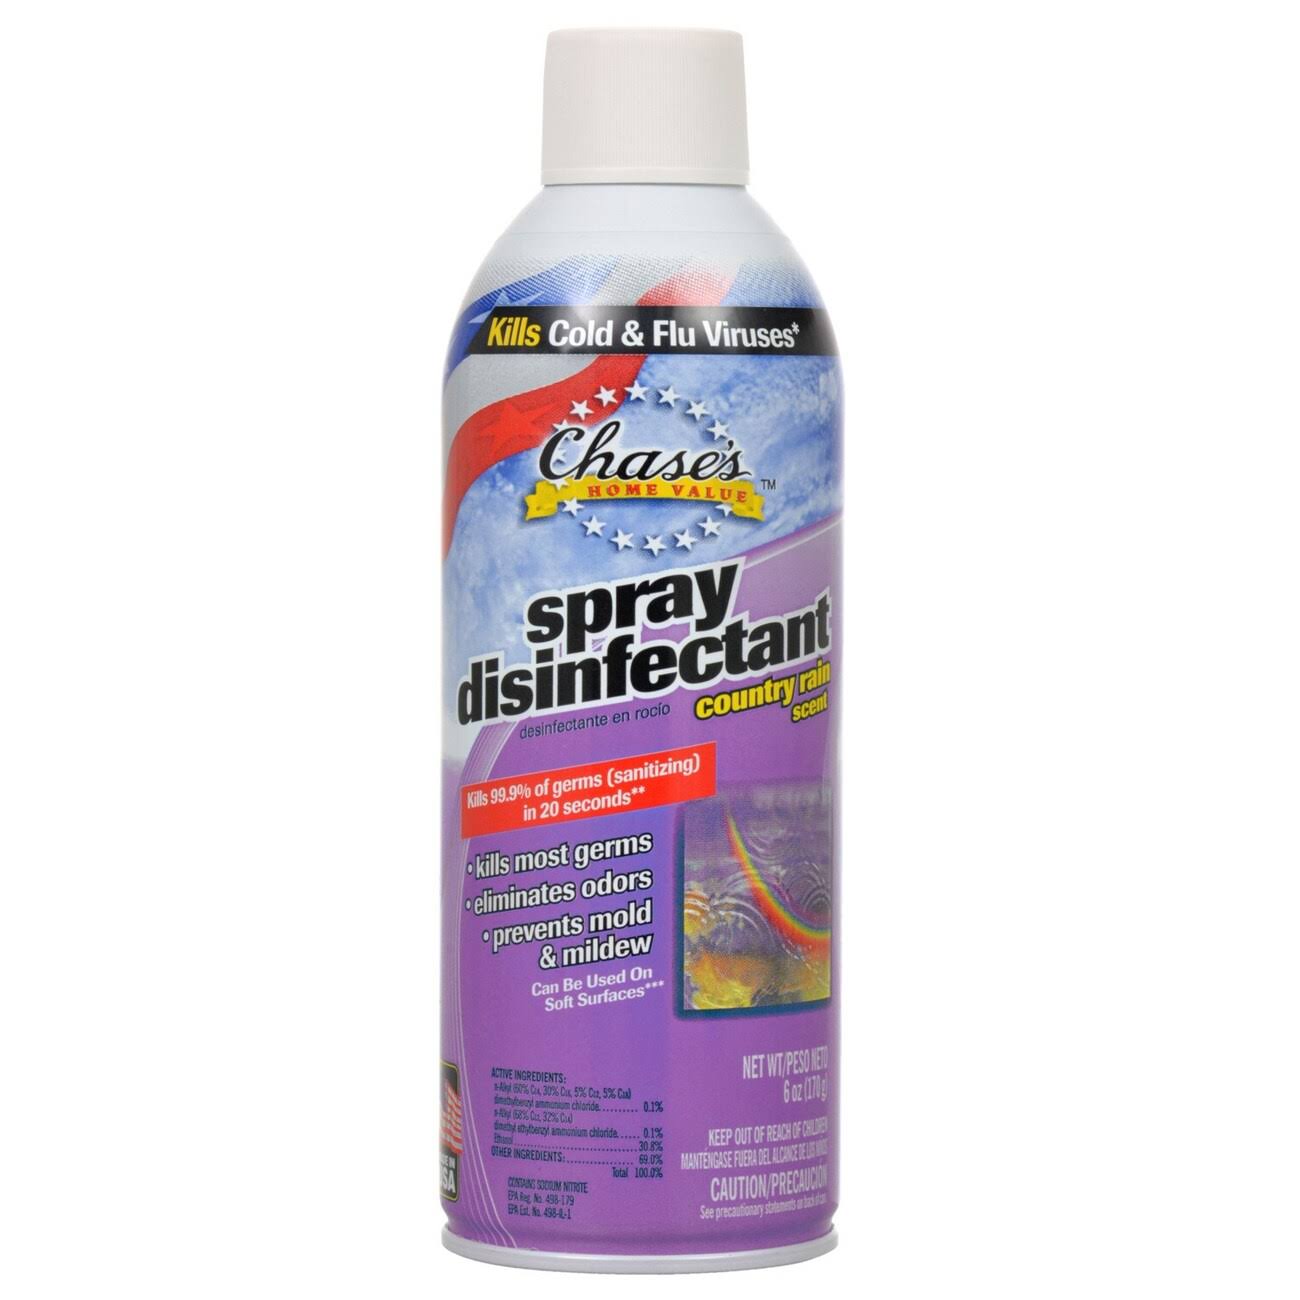 Chase Disinfectant Spray 6 Oz Country Rain Wholesale, Cheap, Discount, Bulk (Pack of 12)